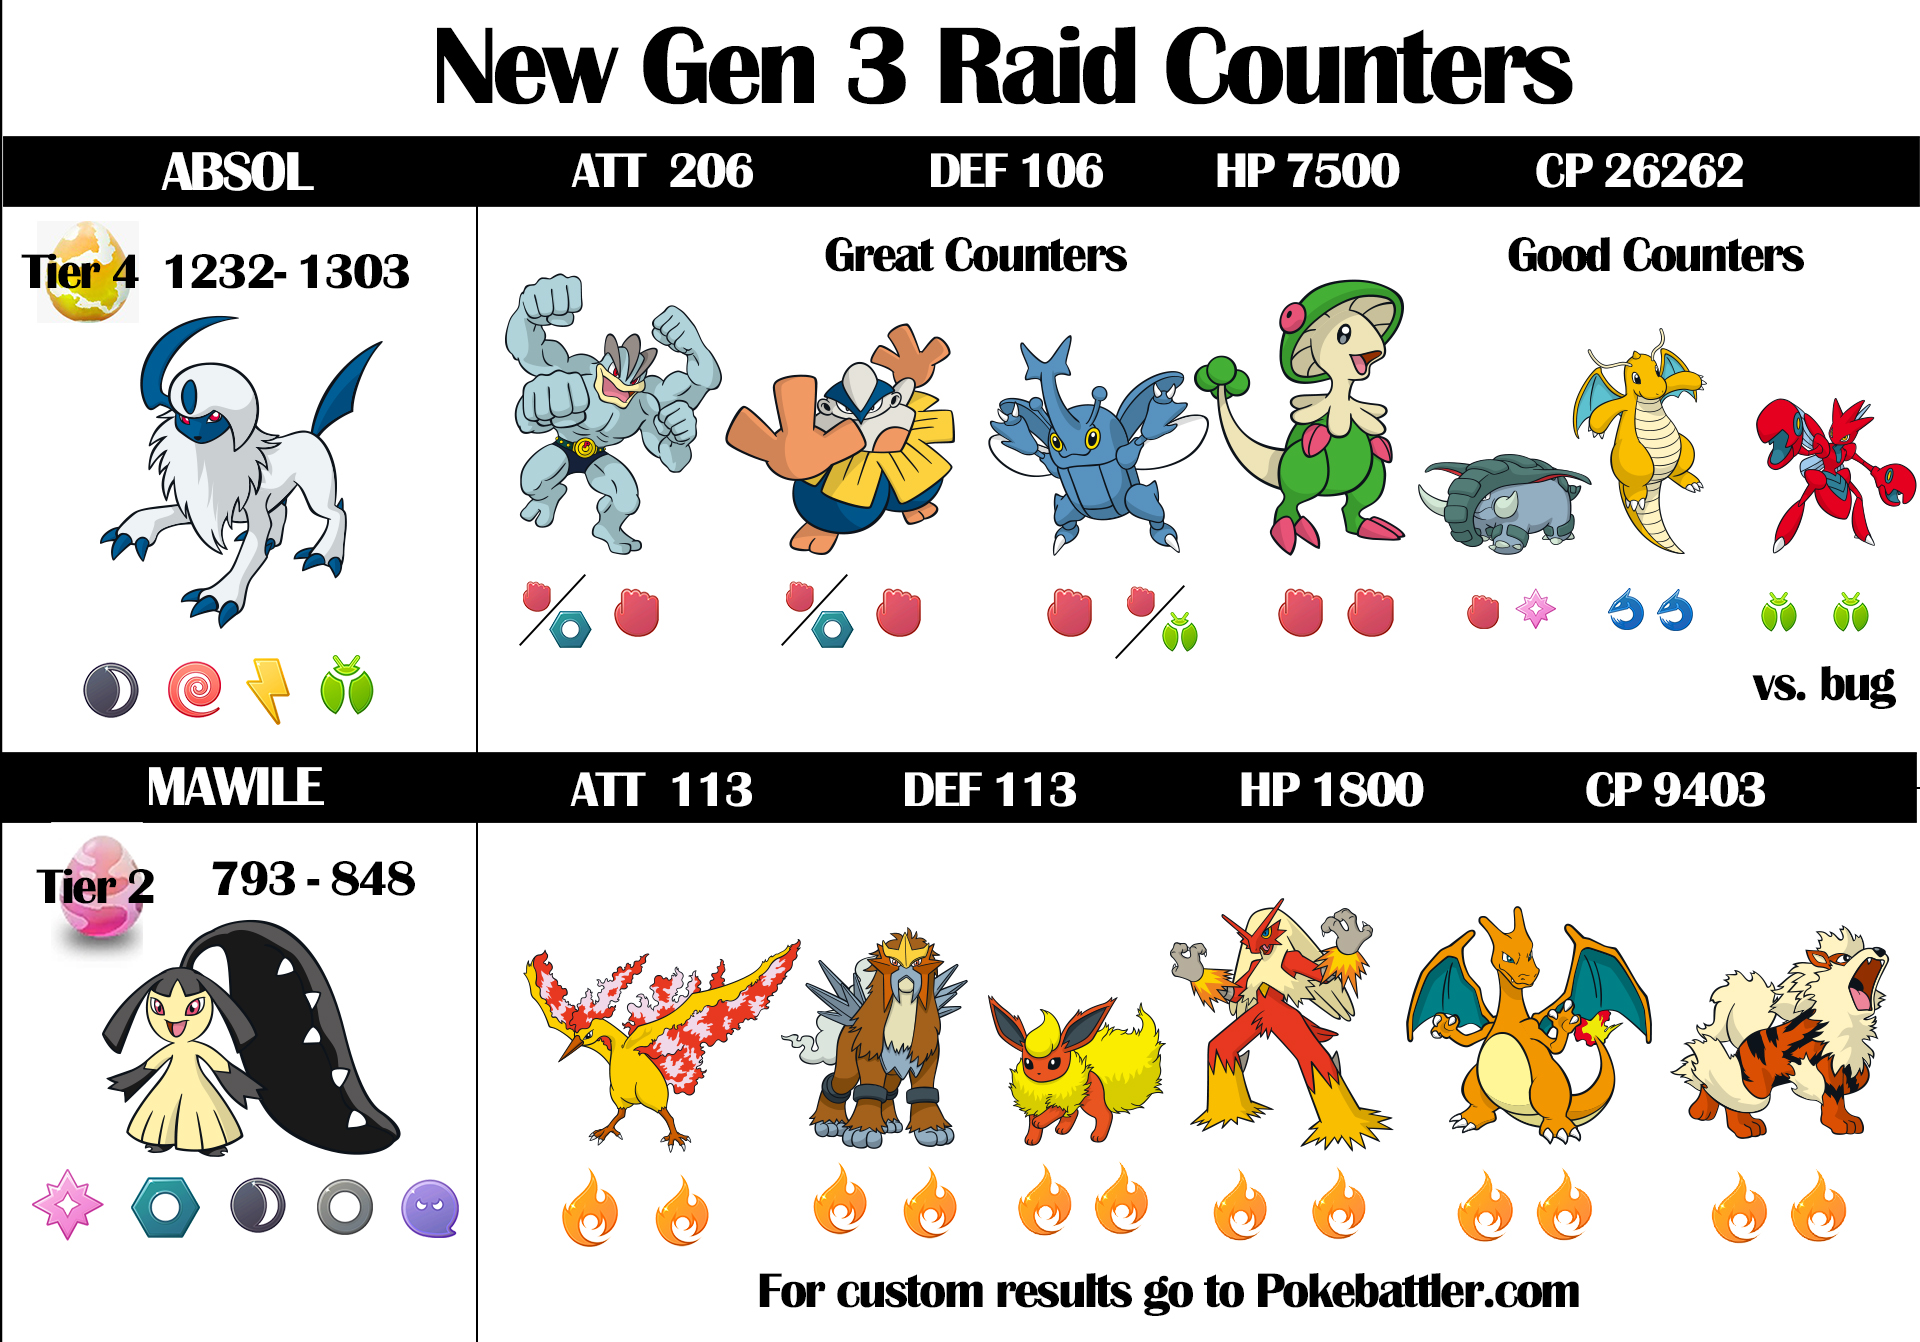 Gen 3 Raid Counters Absol and Mawile 